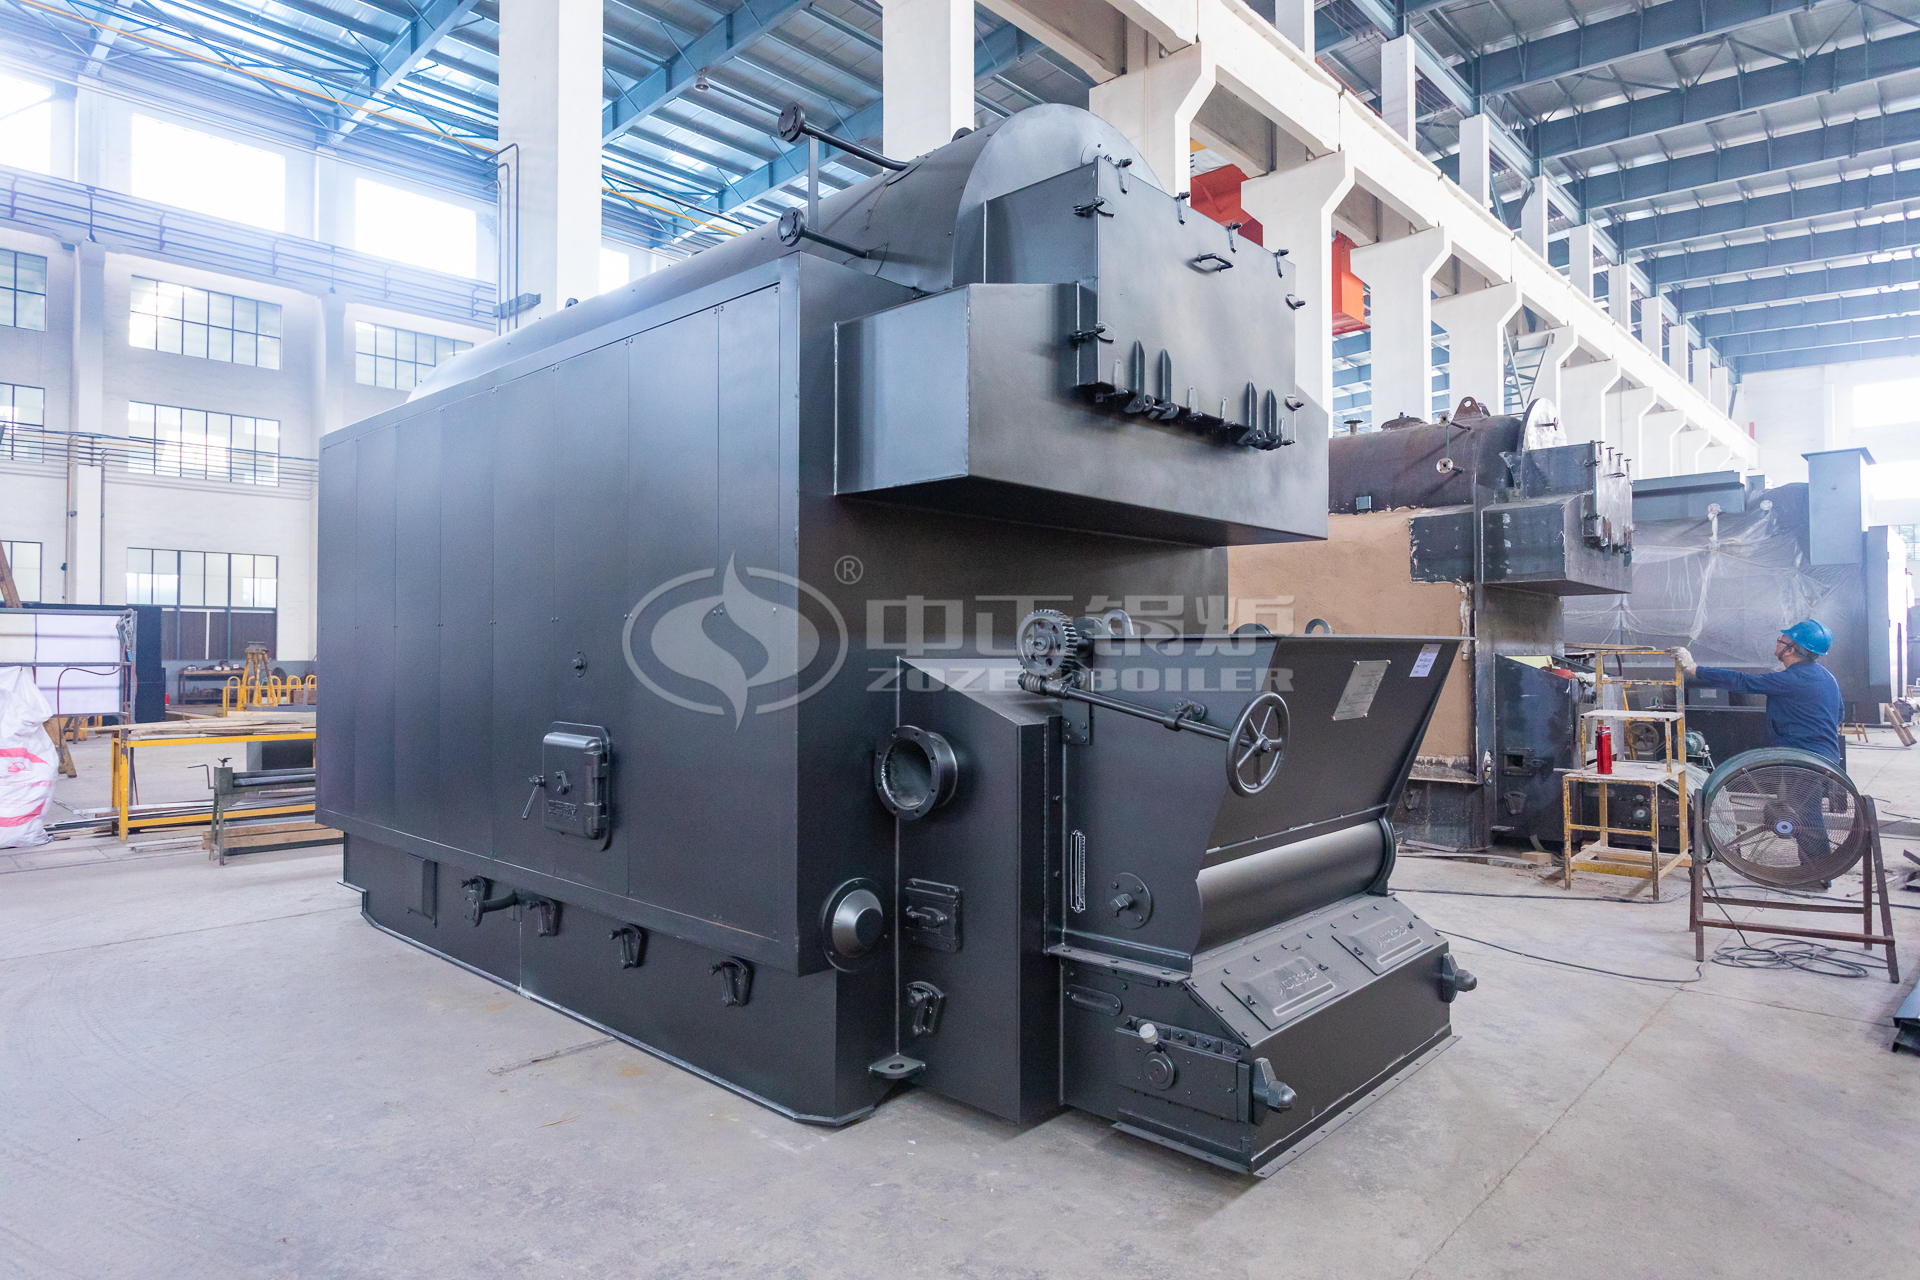 DZL Series Biomass Fired Boiler Application in Industry